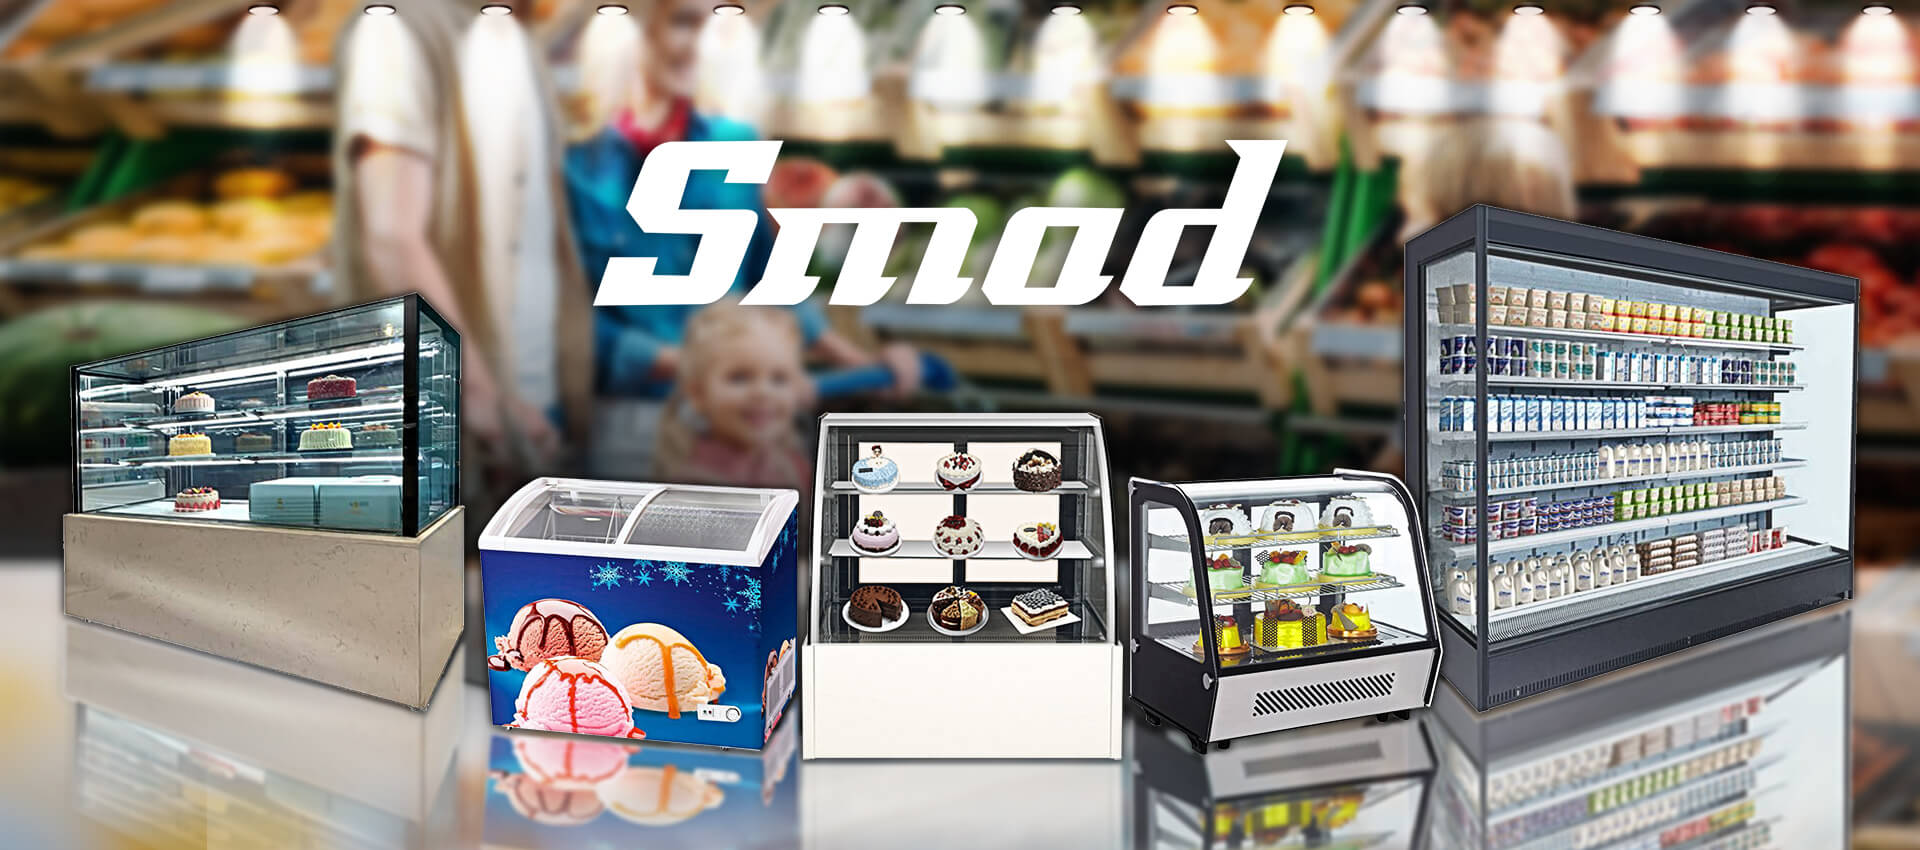 Smad commercial refrigeration equipment includes but not limited to cake cabinets, ice cream freezers, vertical display cabinets, etc.